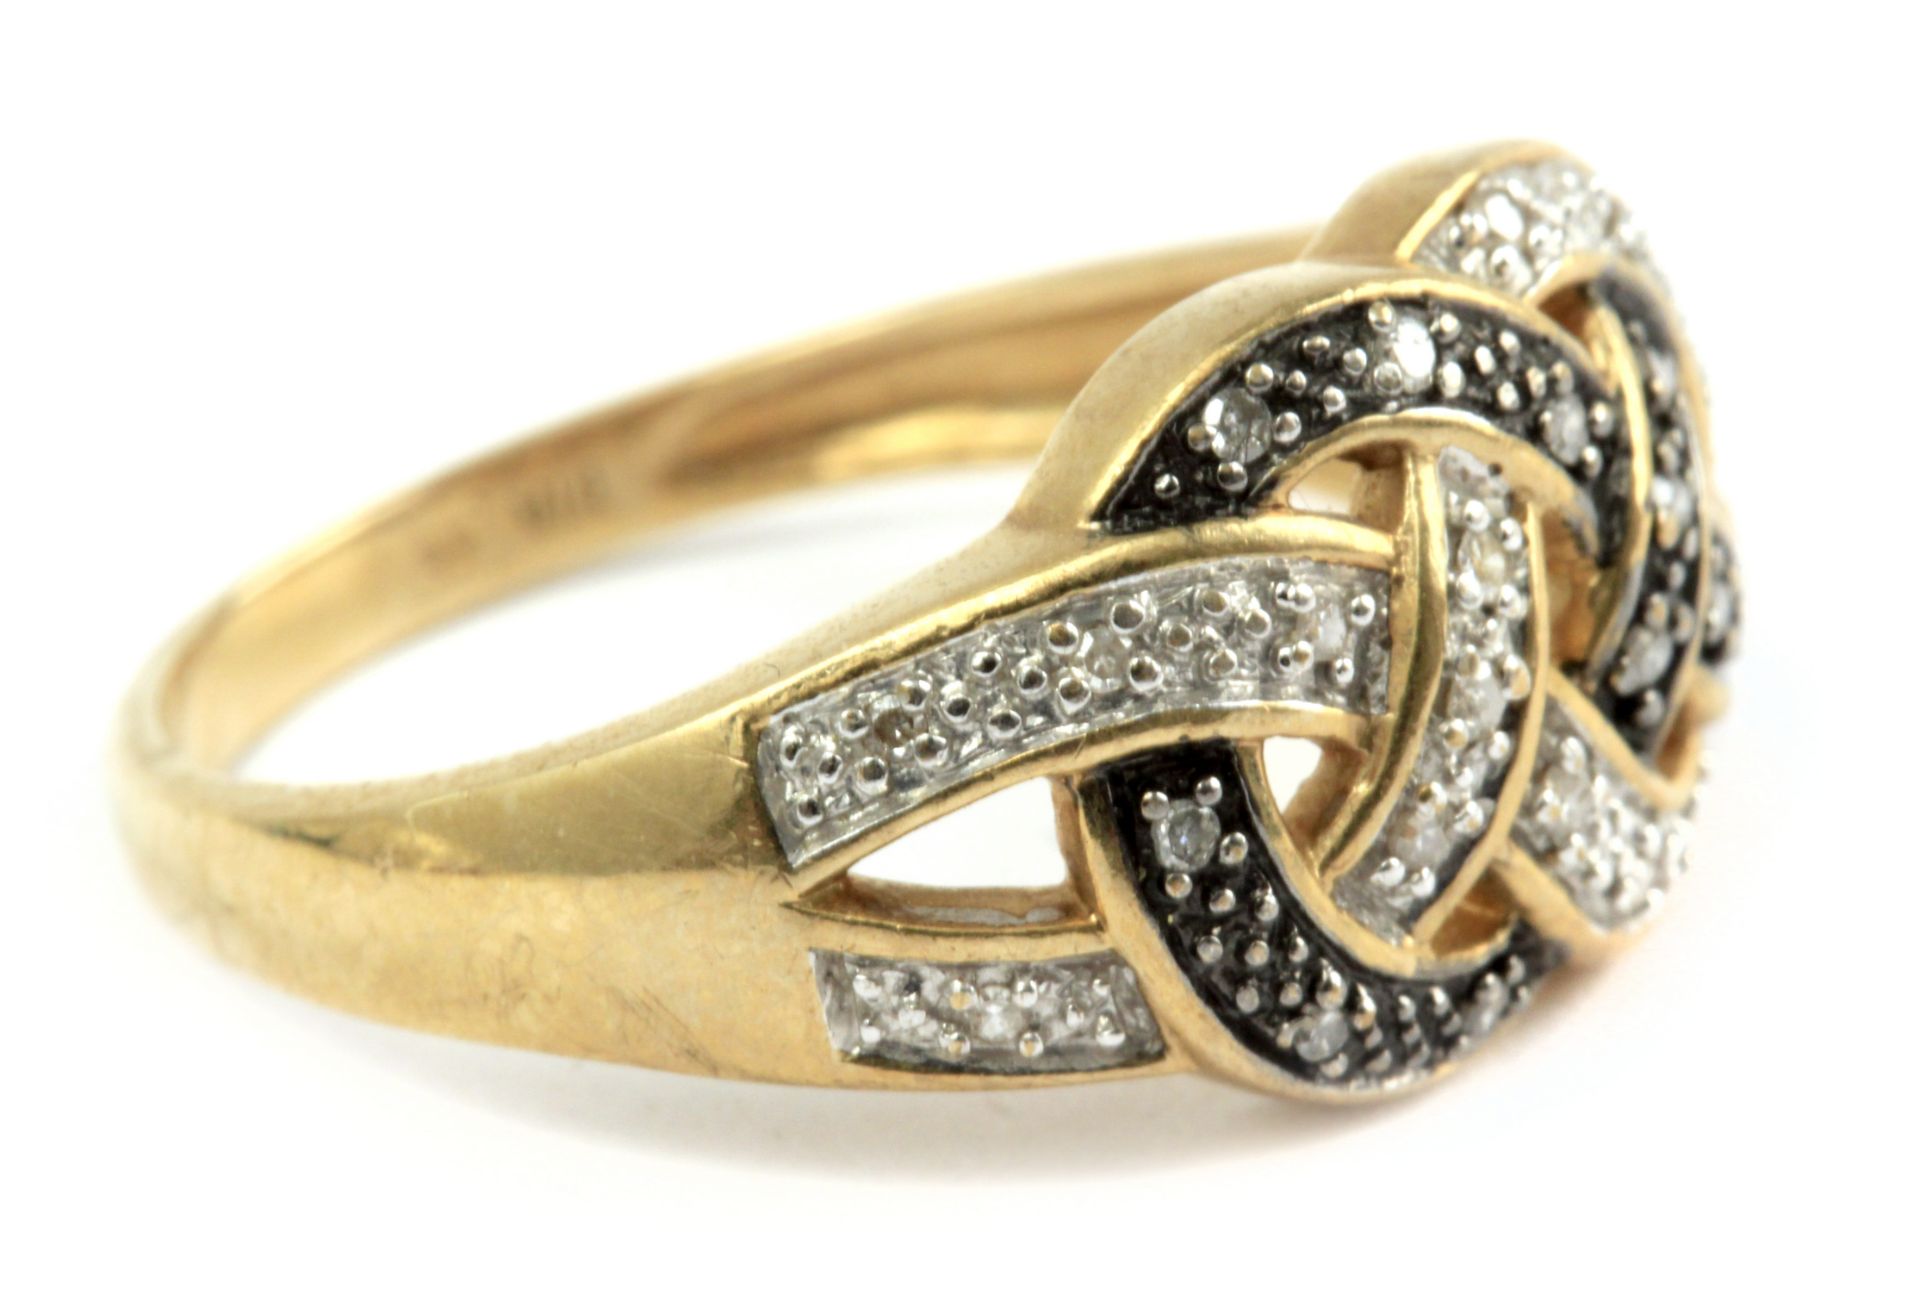 A braided ring with an 18 k. yellow gold and silver setting with single cut diamonds - Image 3 of 3